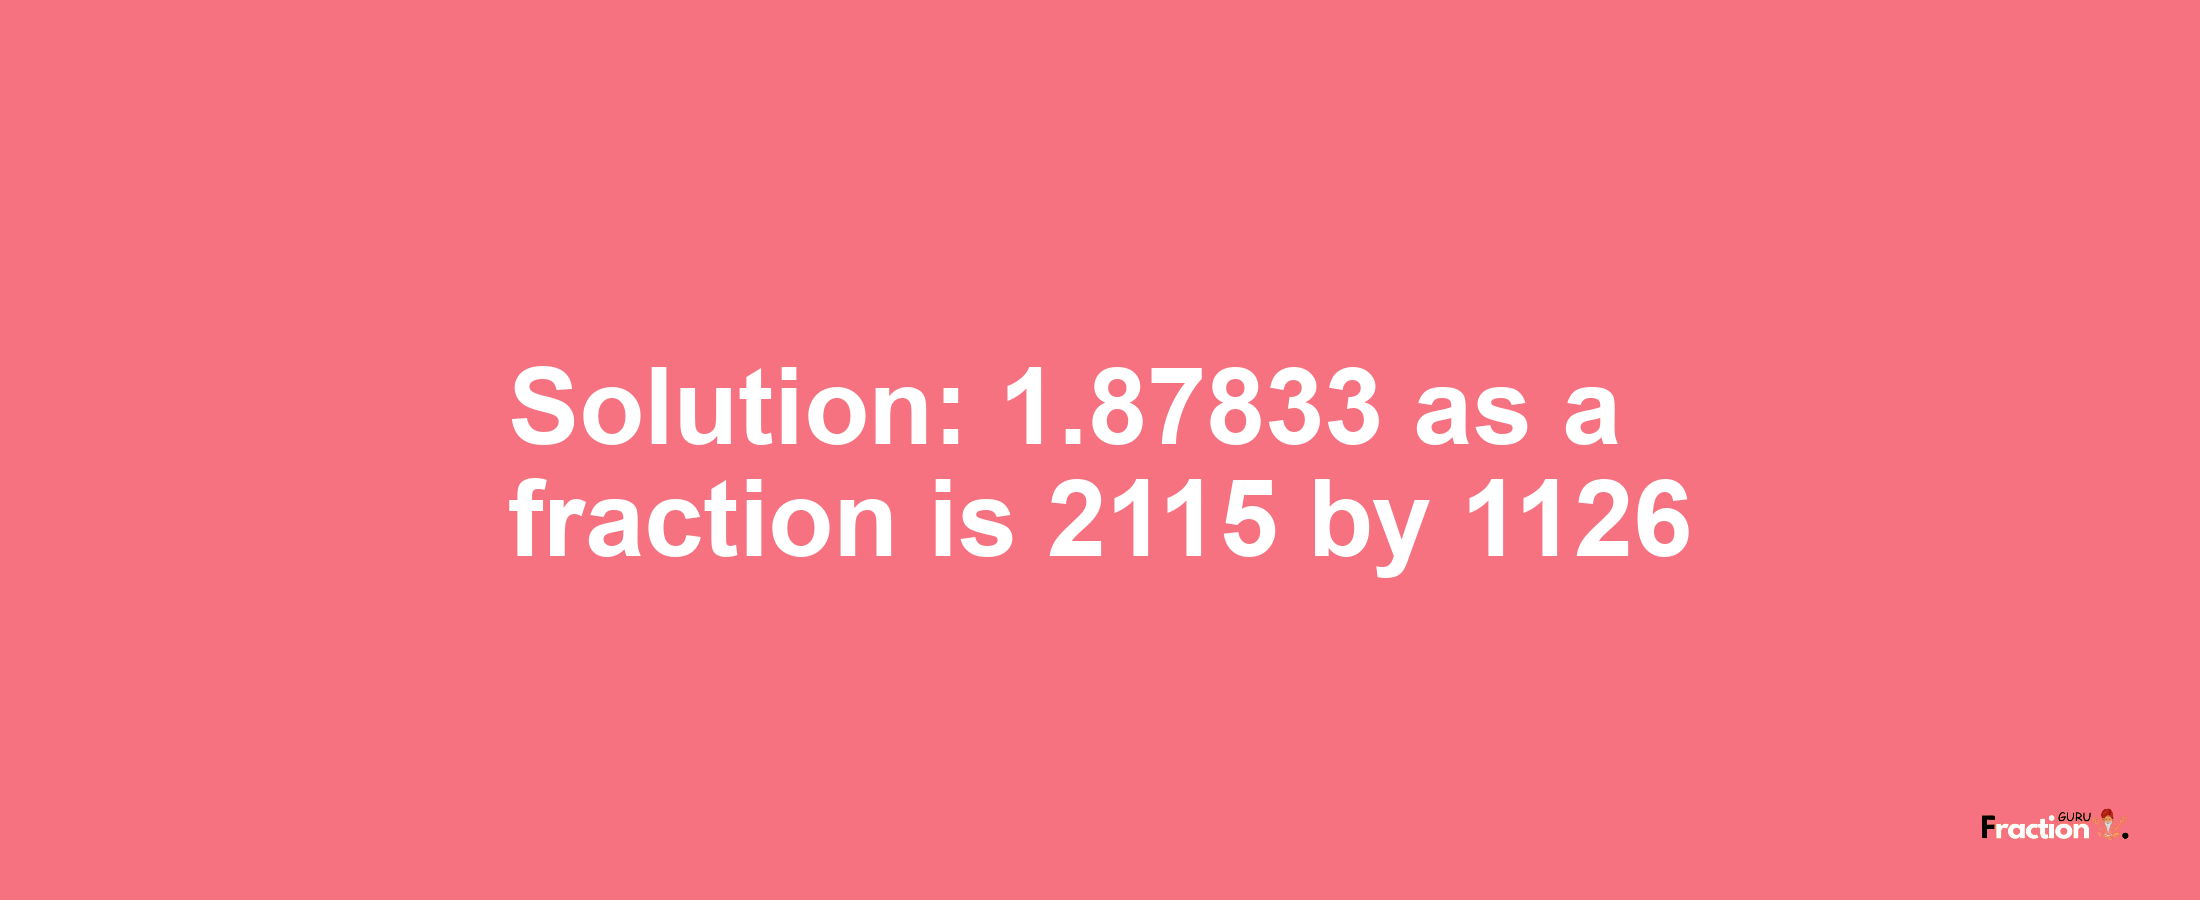 Solution:1.87833 as a fraction is 2115/1126